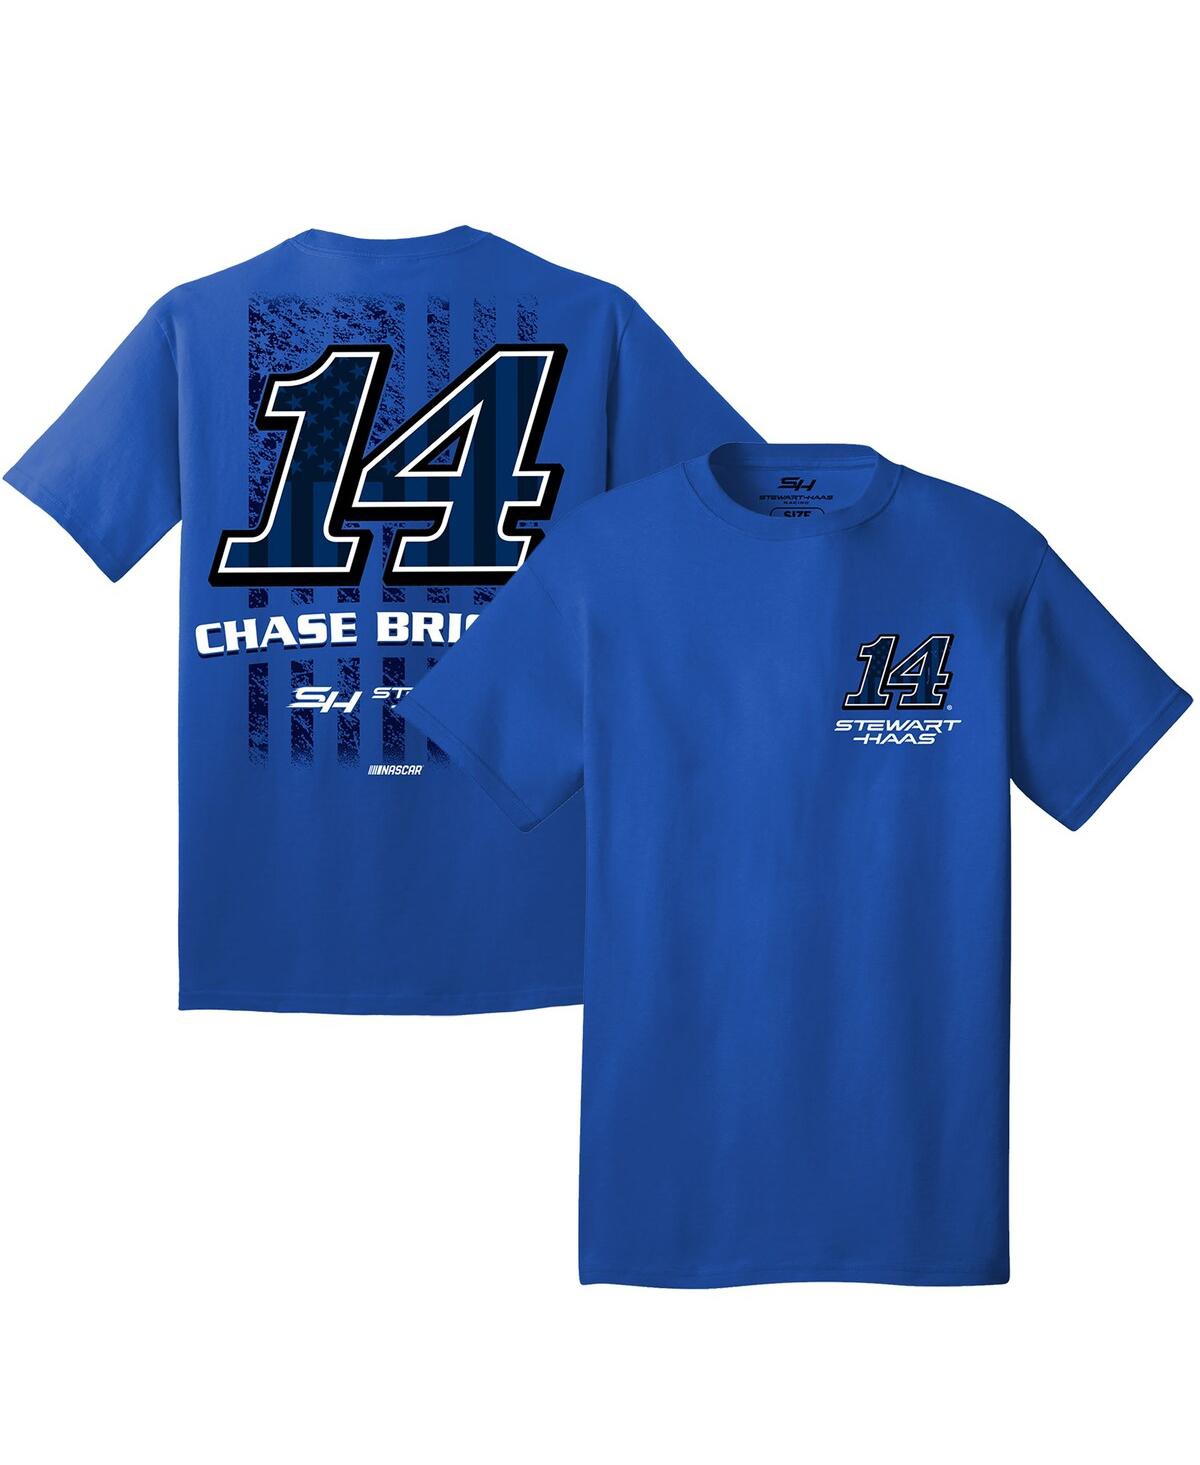 Stewart-haas Racing Team Collection Men's  Royal Chase Briscoe Flag T-shirt